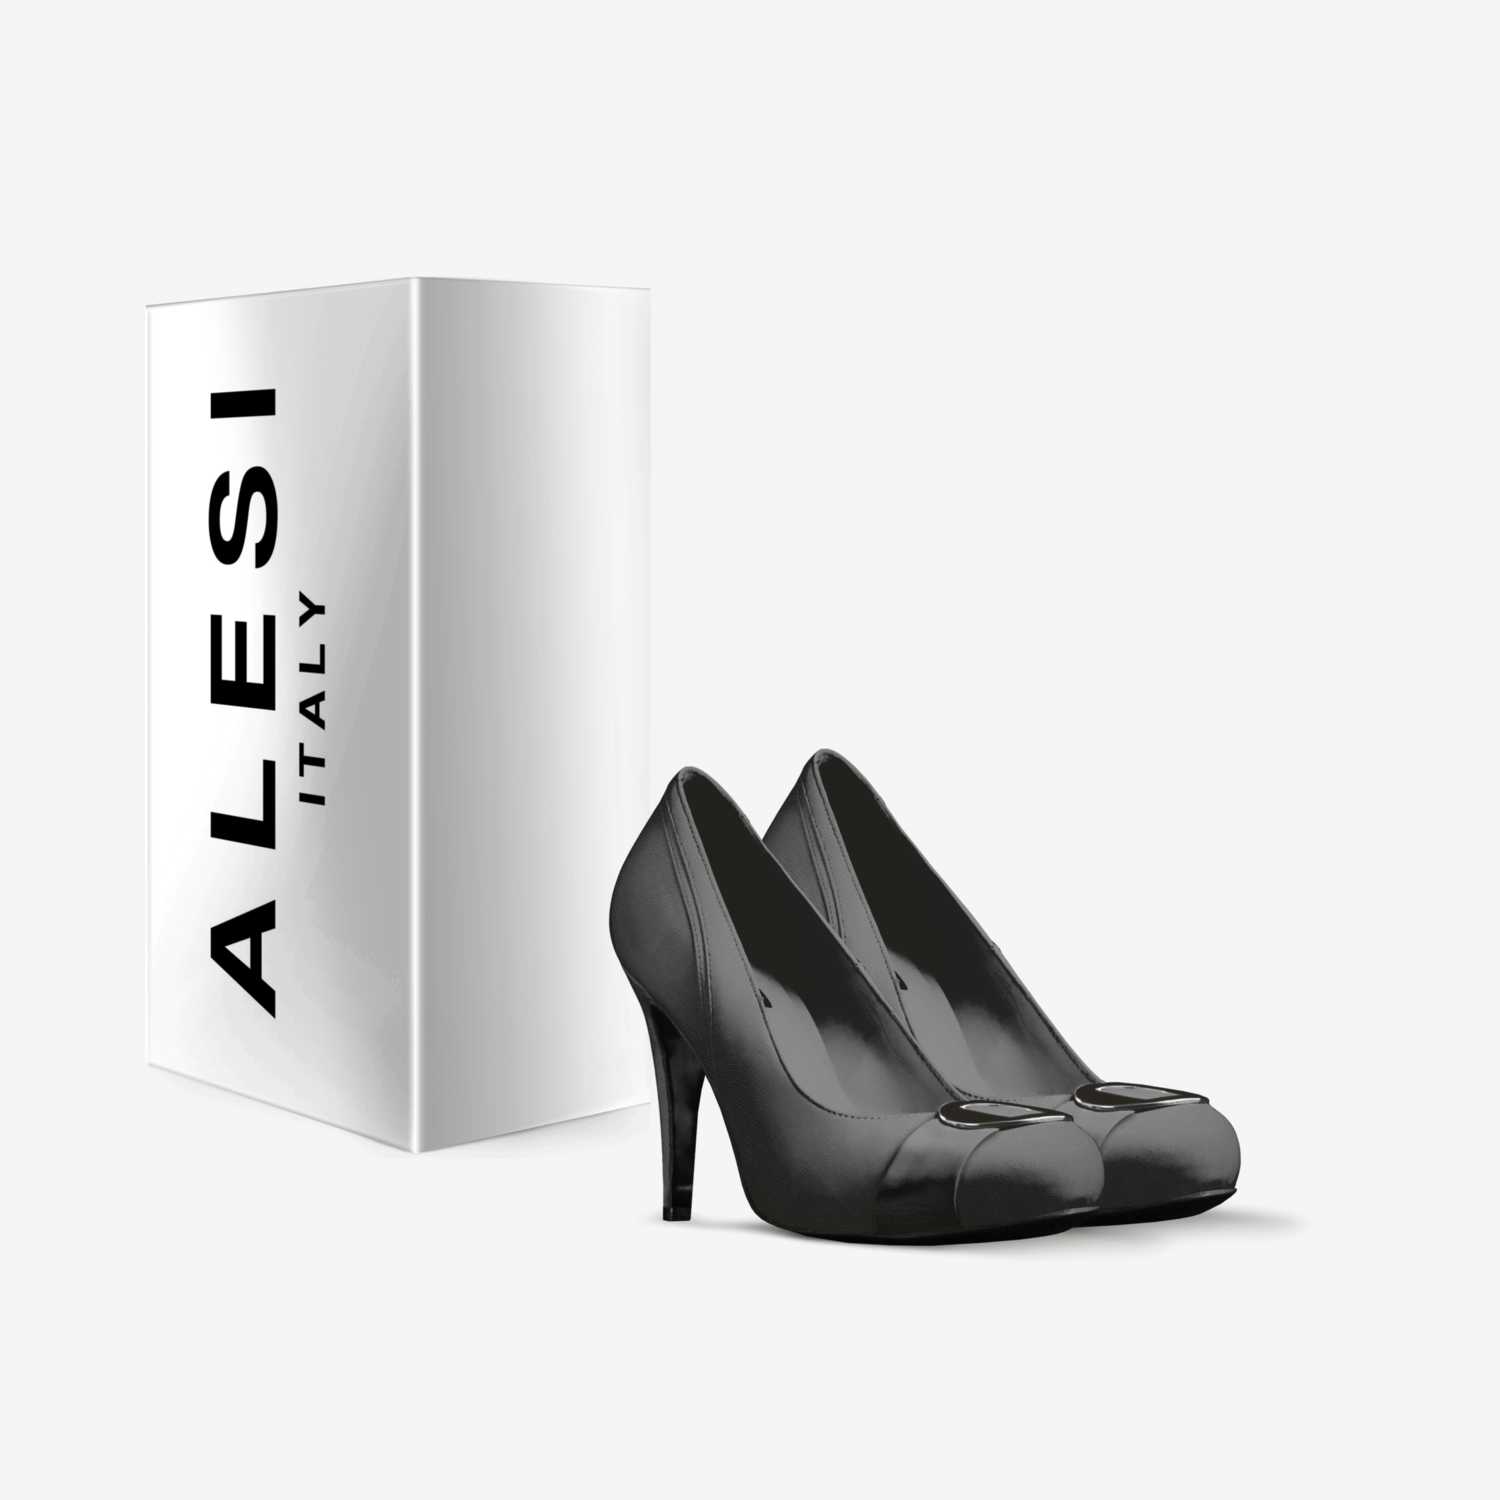 ALESI HIGH HEEL custom made in Italy shoes by Lonanthony Parker | Box view